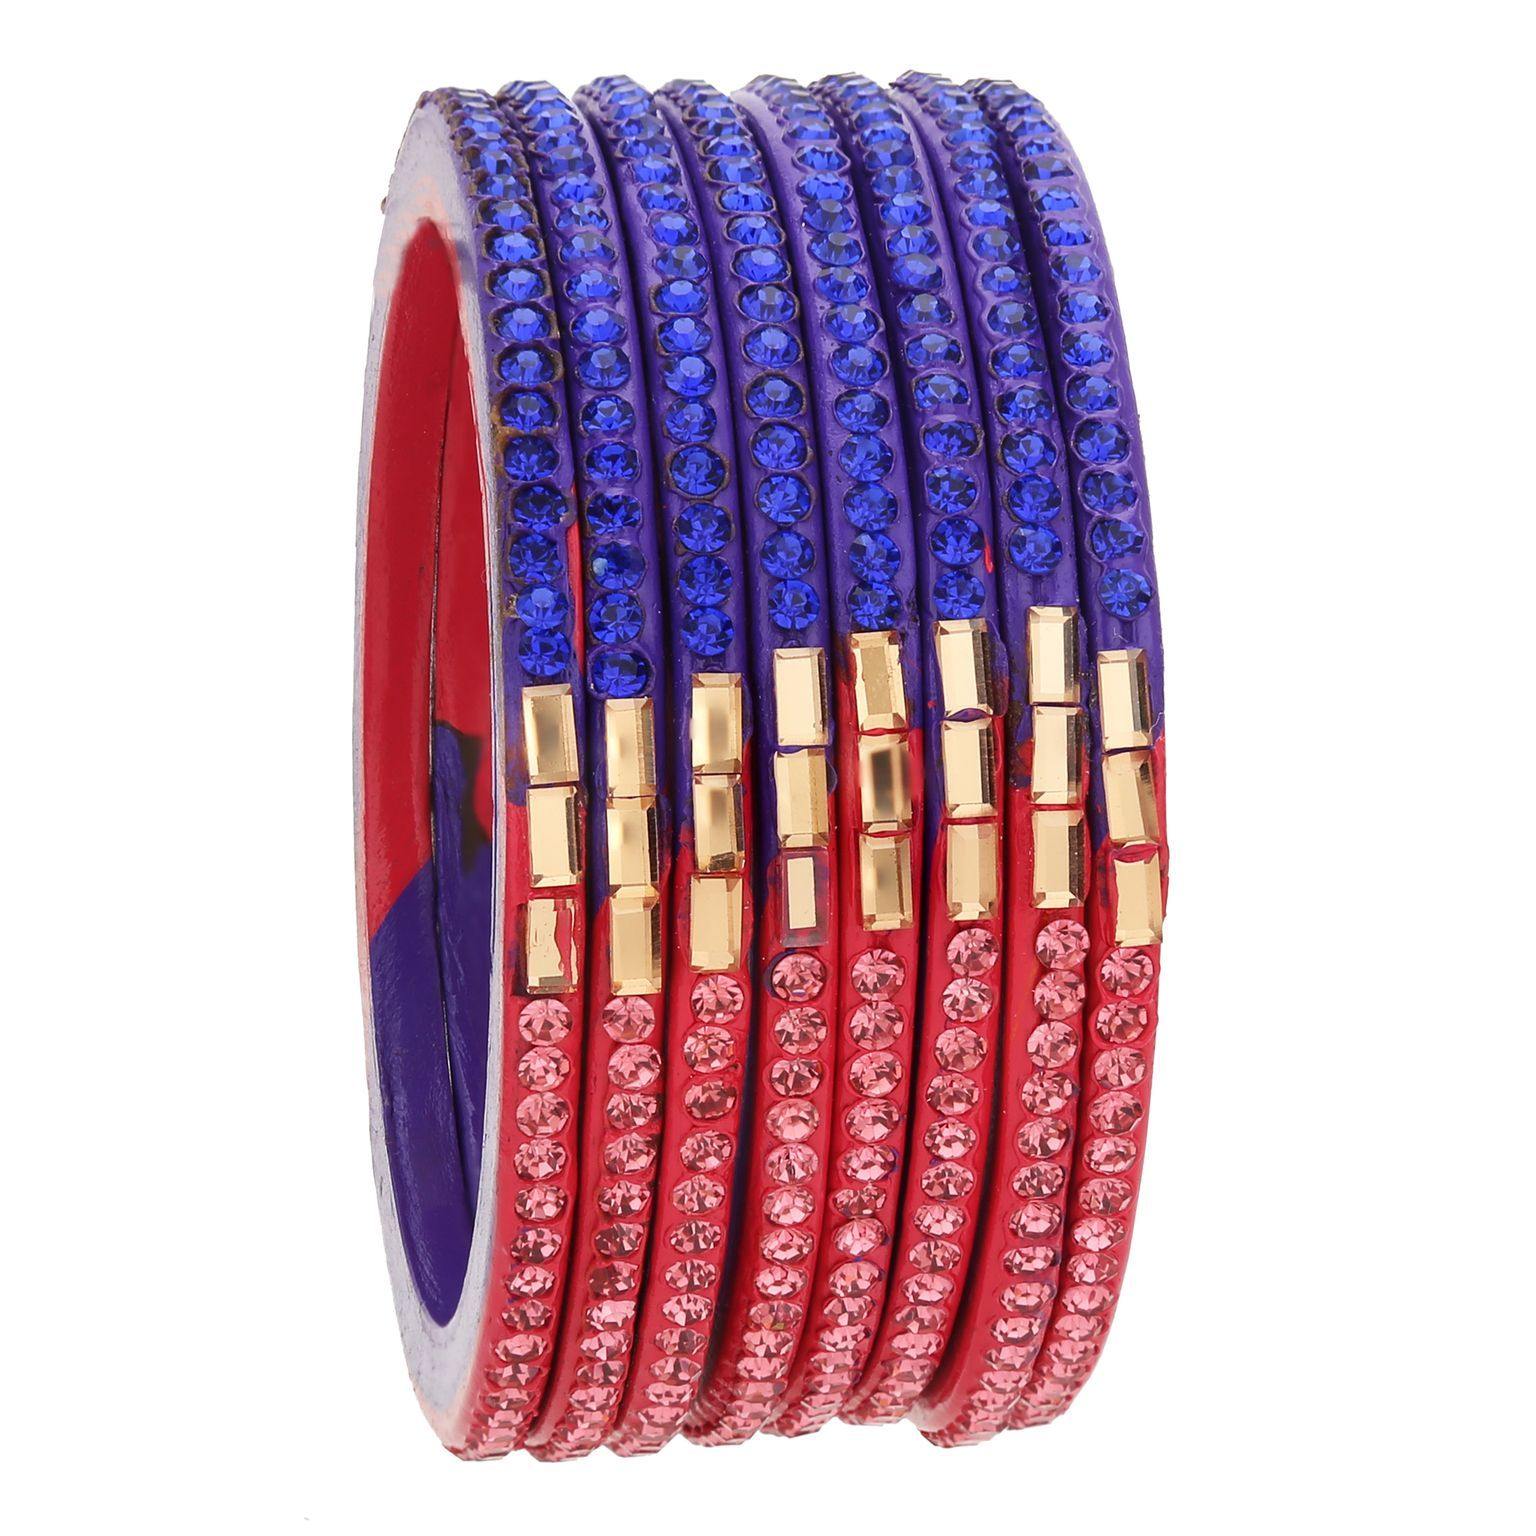 sukriti traditional pink-blue lac bangles for women - set of 8